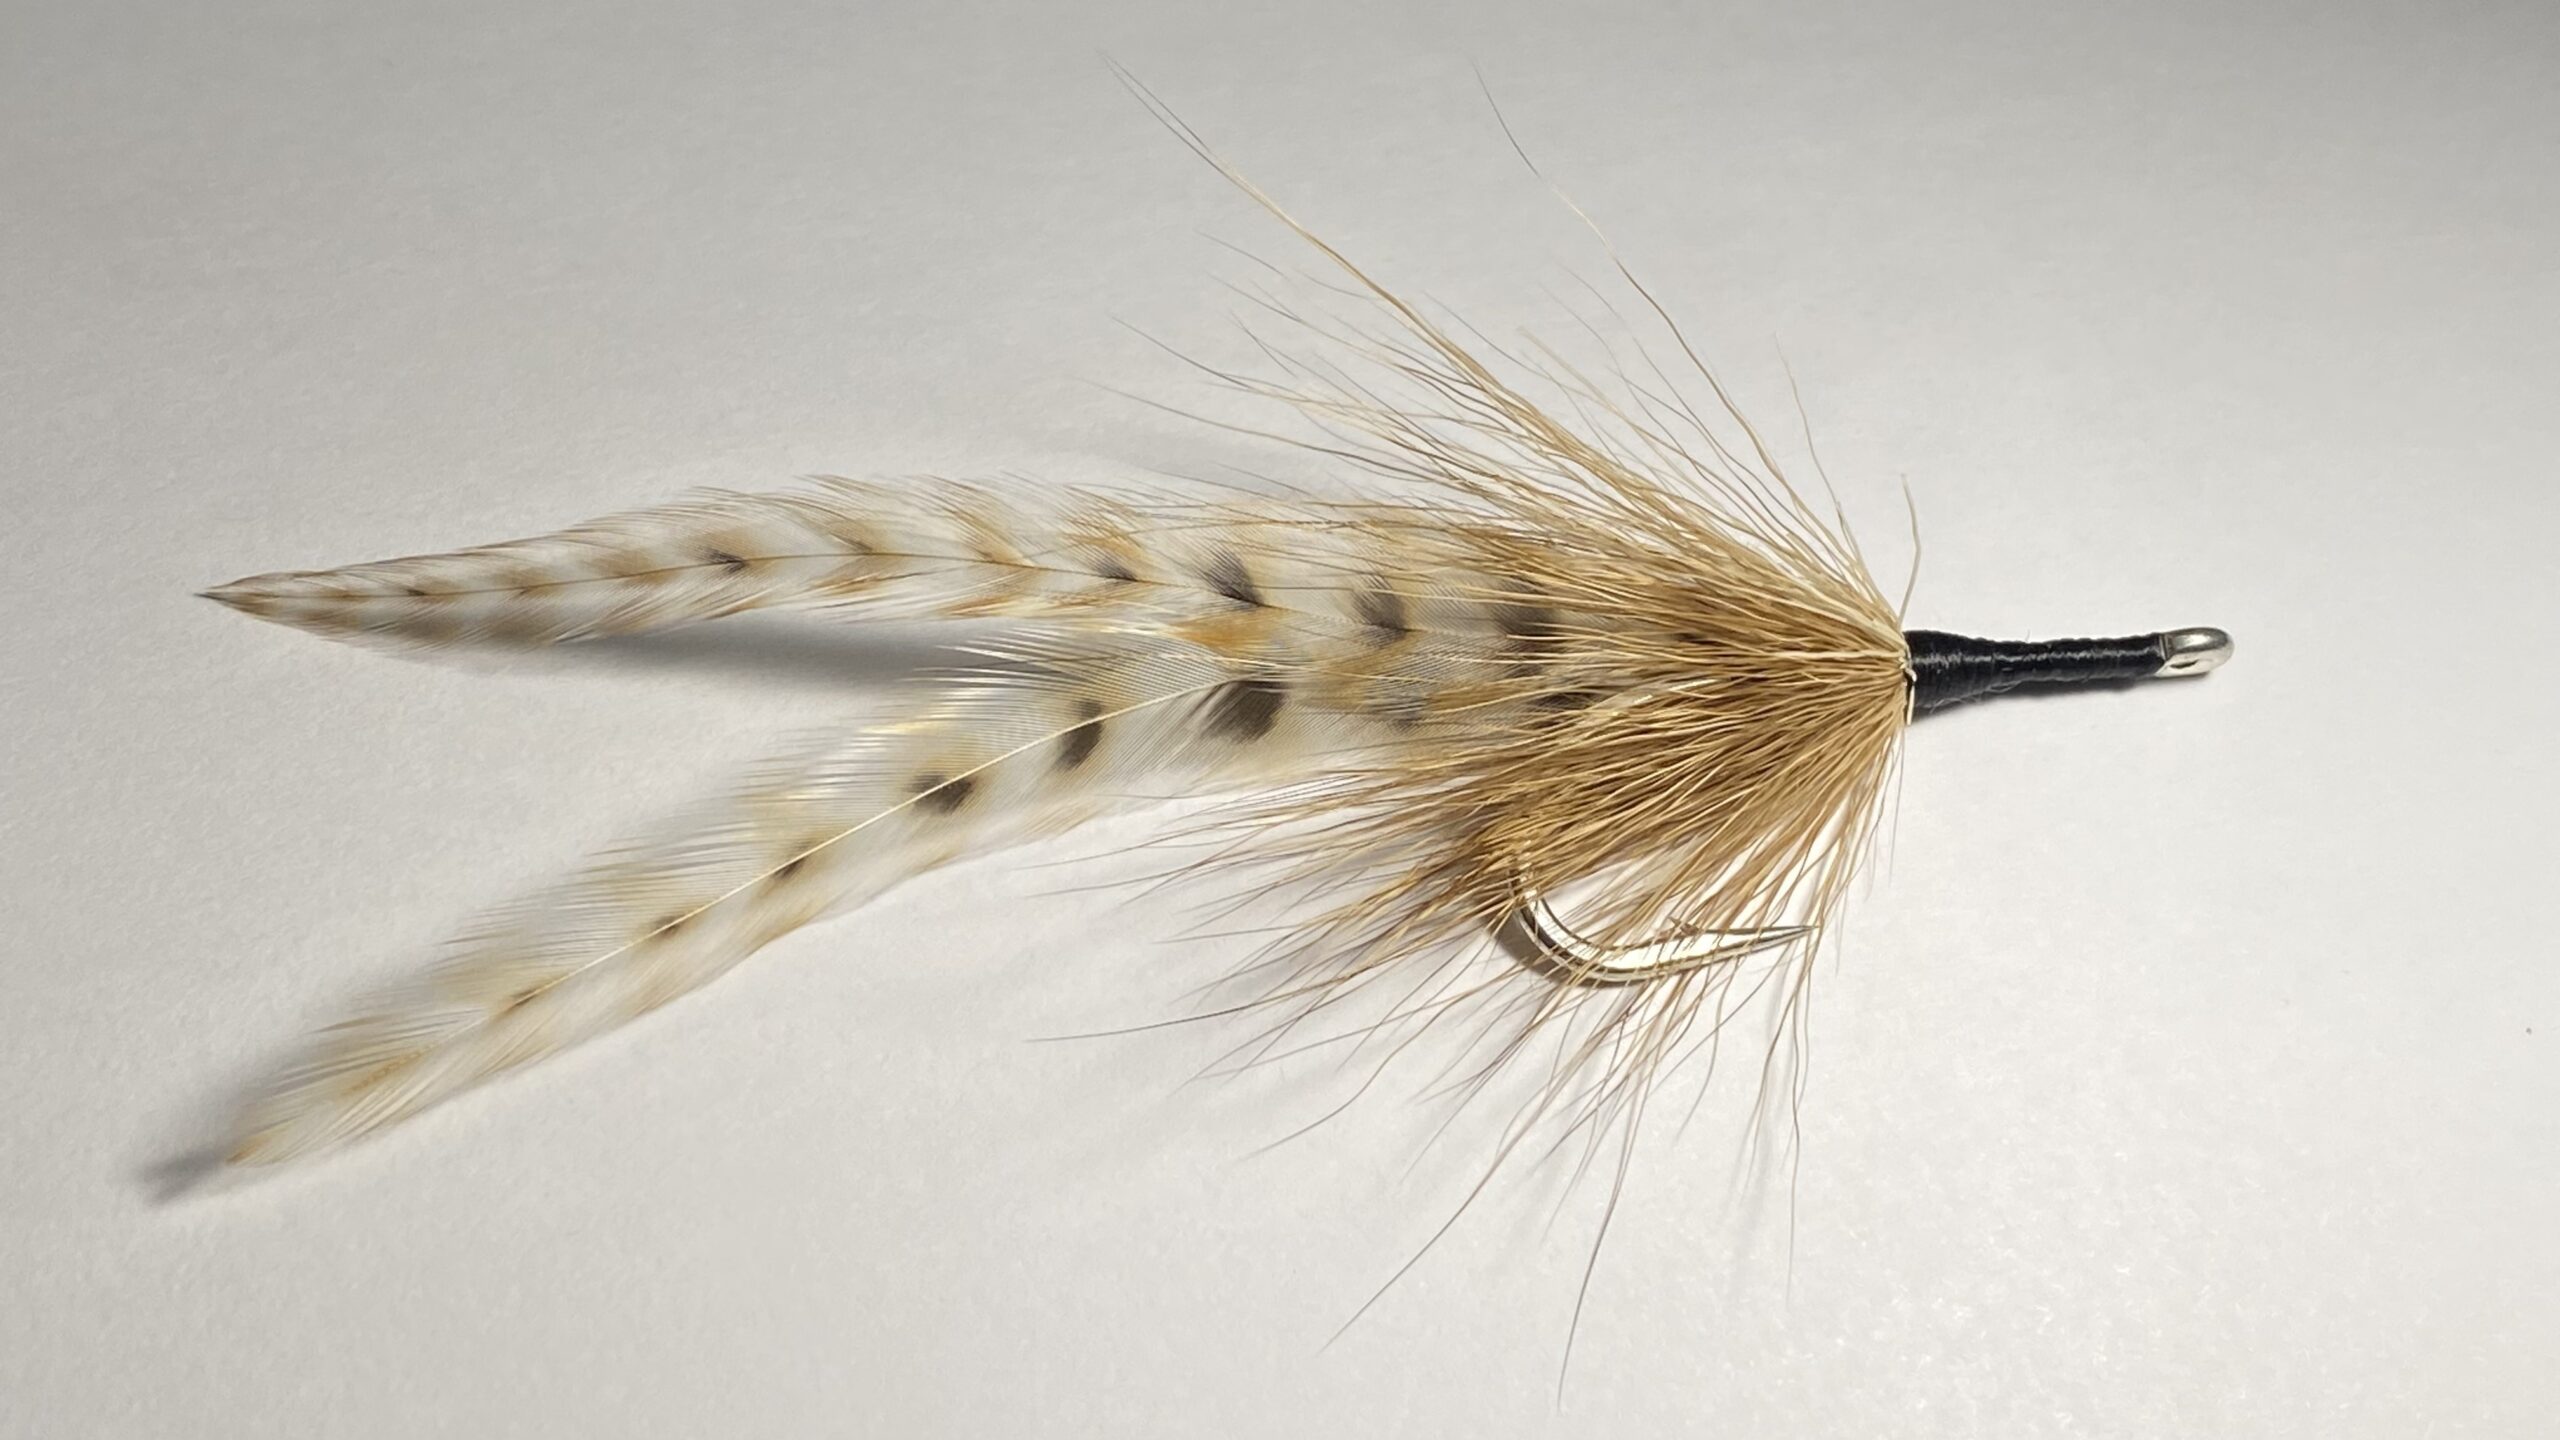 Tarpon Cockroach – One of the Best Tarpon Flies of All-Time